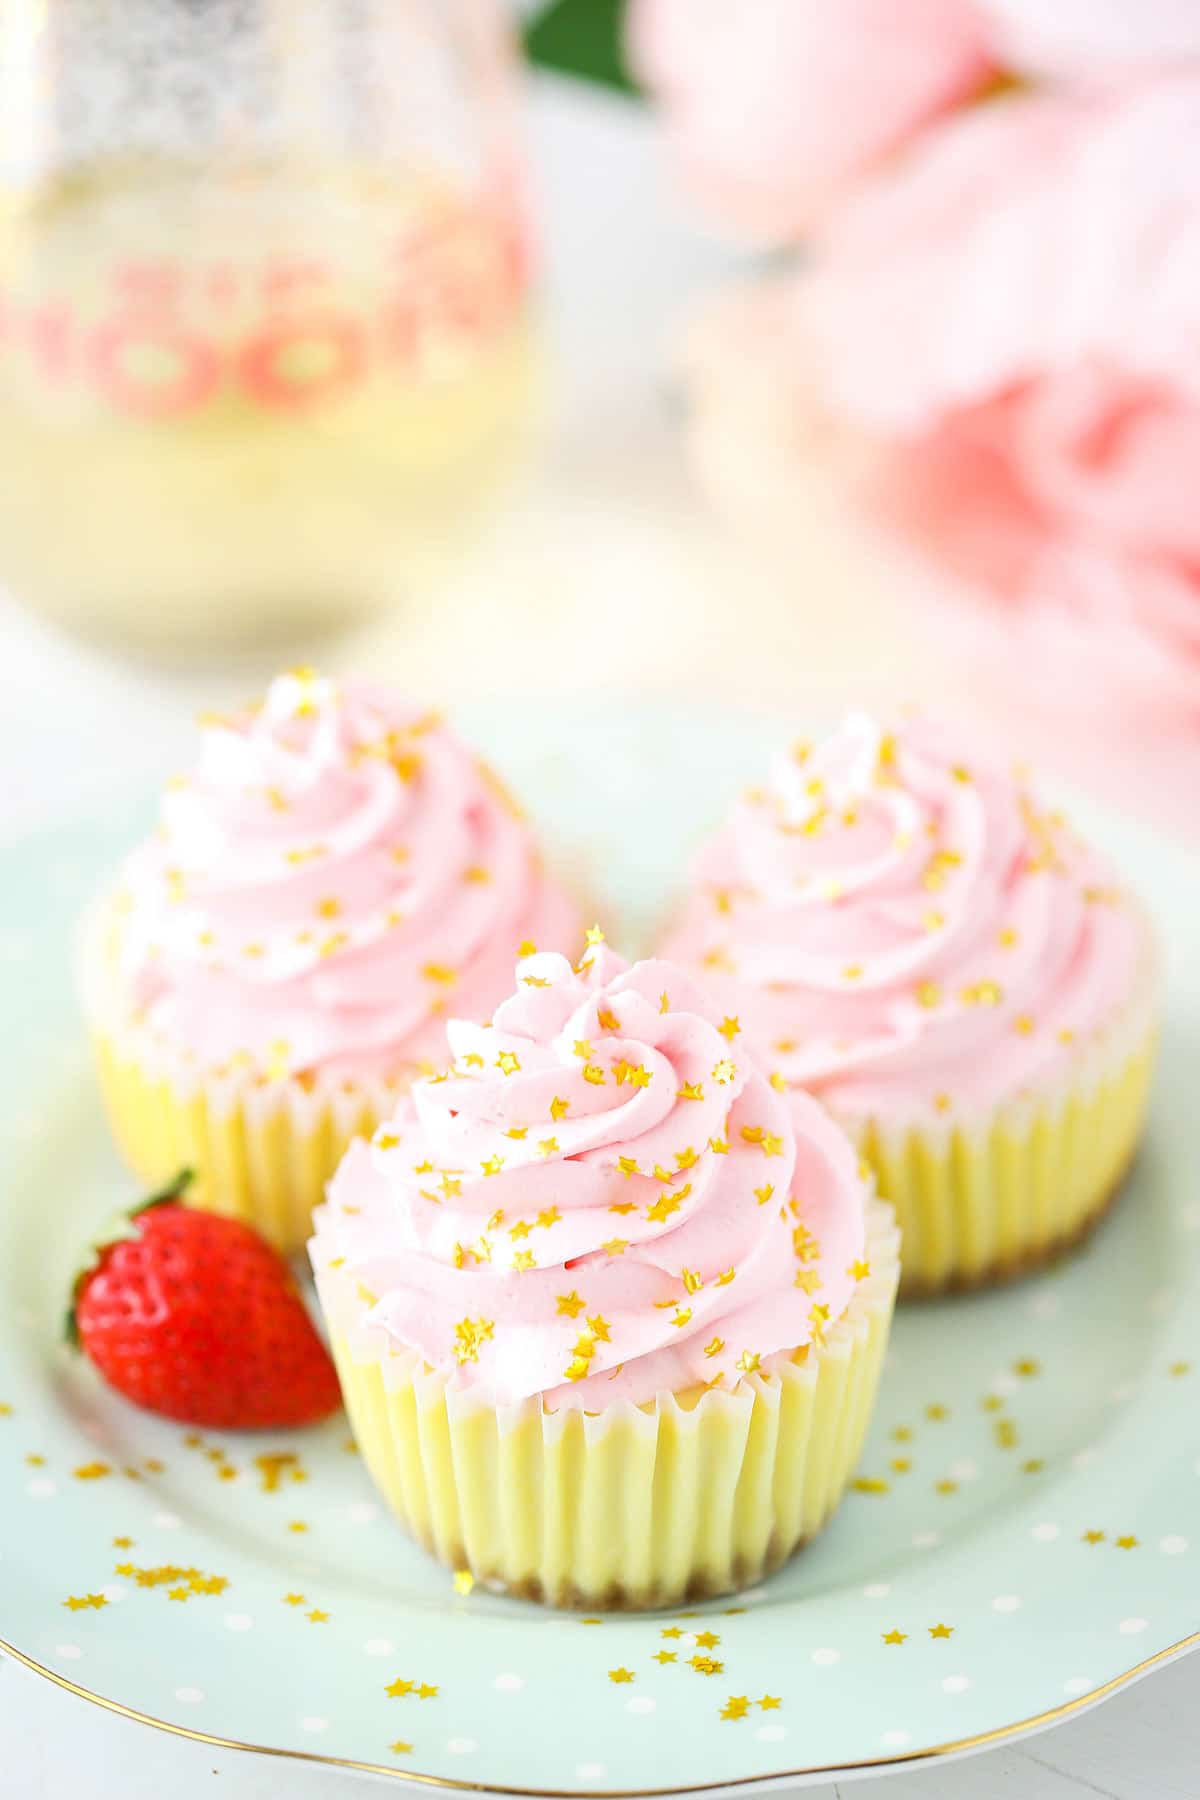 Three champagne cheesecake bites on a plate with a fresh strawberry